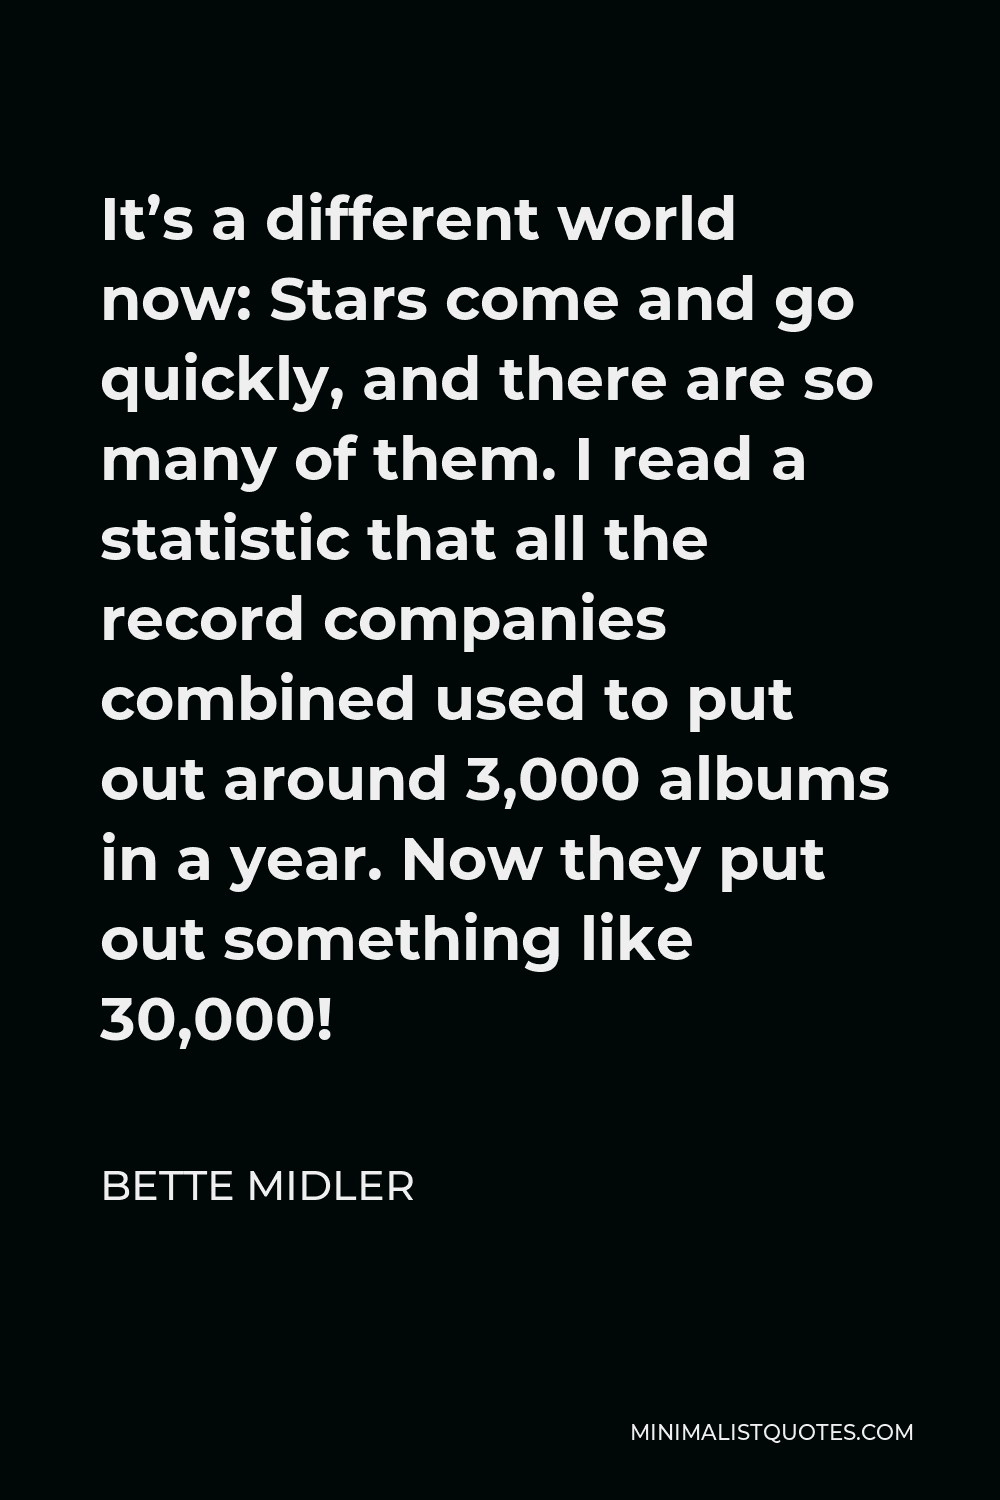 Bette Midler Quote - It’s a different world now: Stars come and go quickly, and there are so many of them. I read a statistic that all the record companies combined used to put out around 3,000 albums in a year. Now they put out something like 30,000!